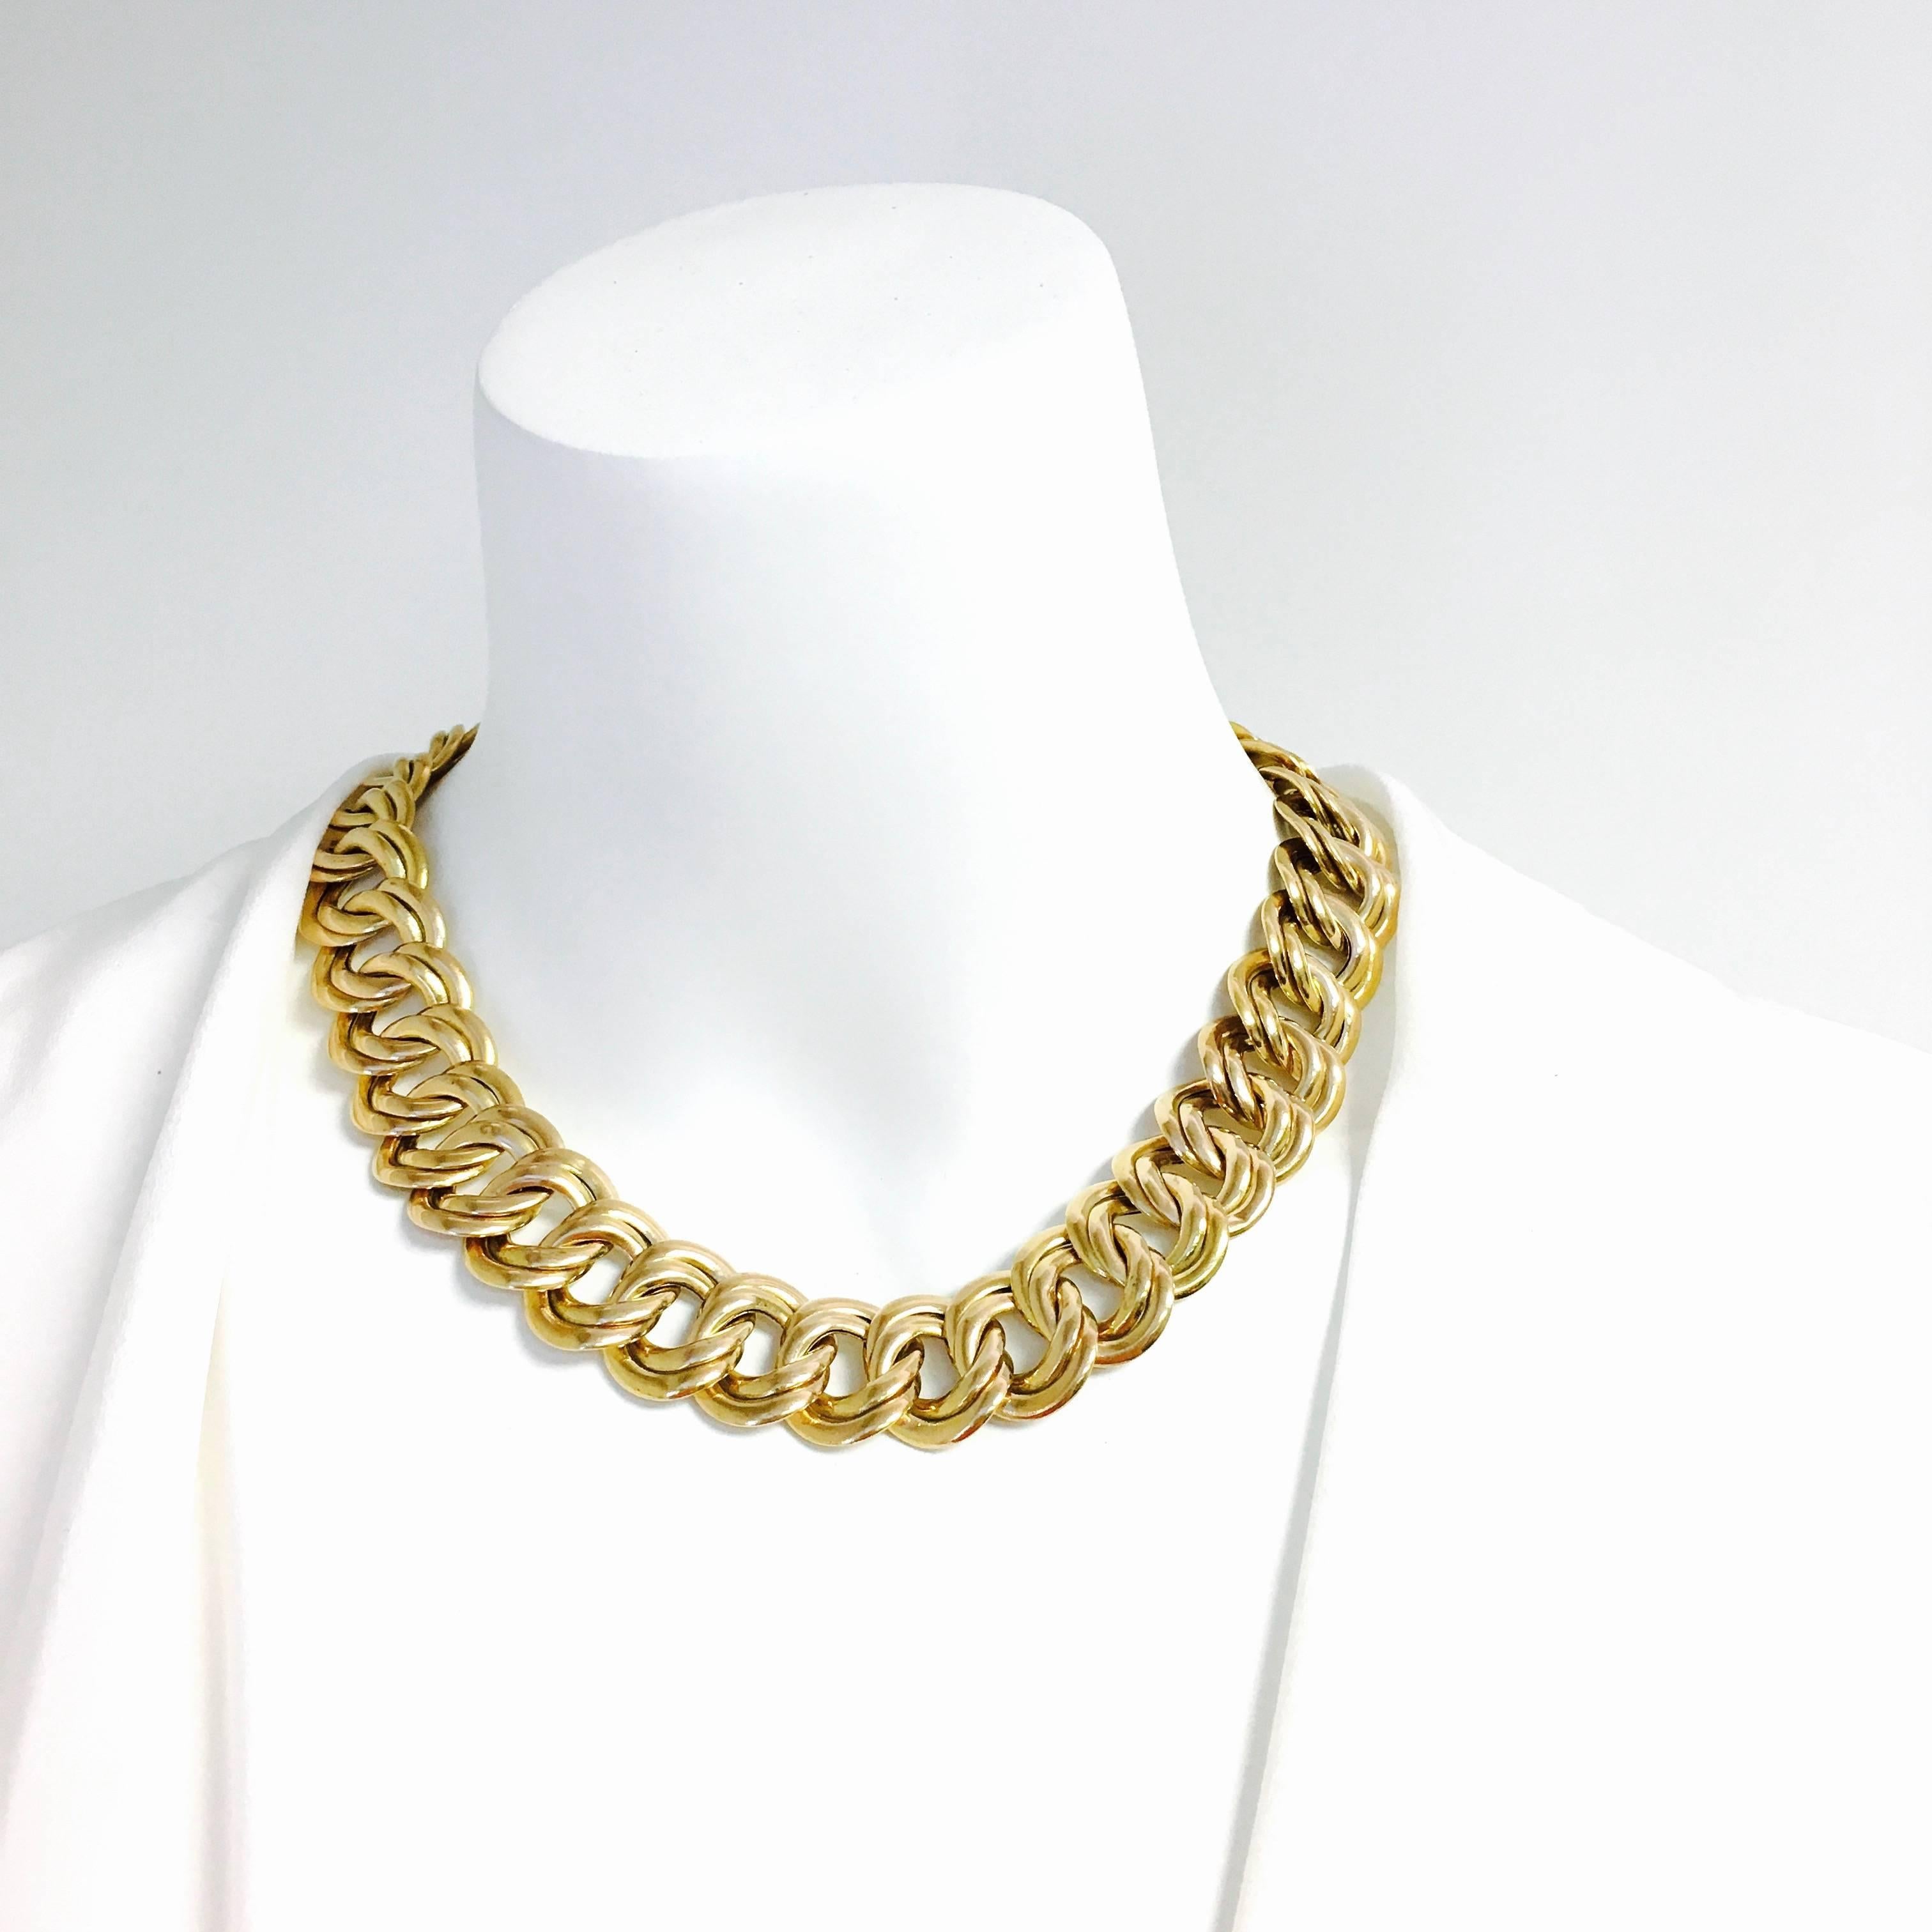 14K yellow gold chain necklace, composed of a series of inter-locking double row links terminating in a hidden clasp with safety. 
Measurements: 
Length: 18 1/4